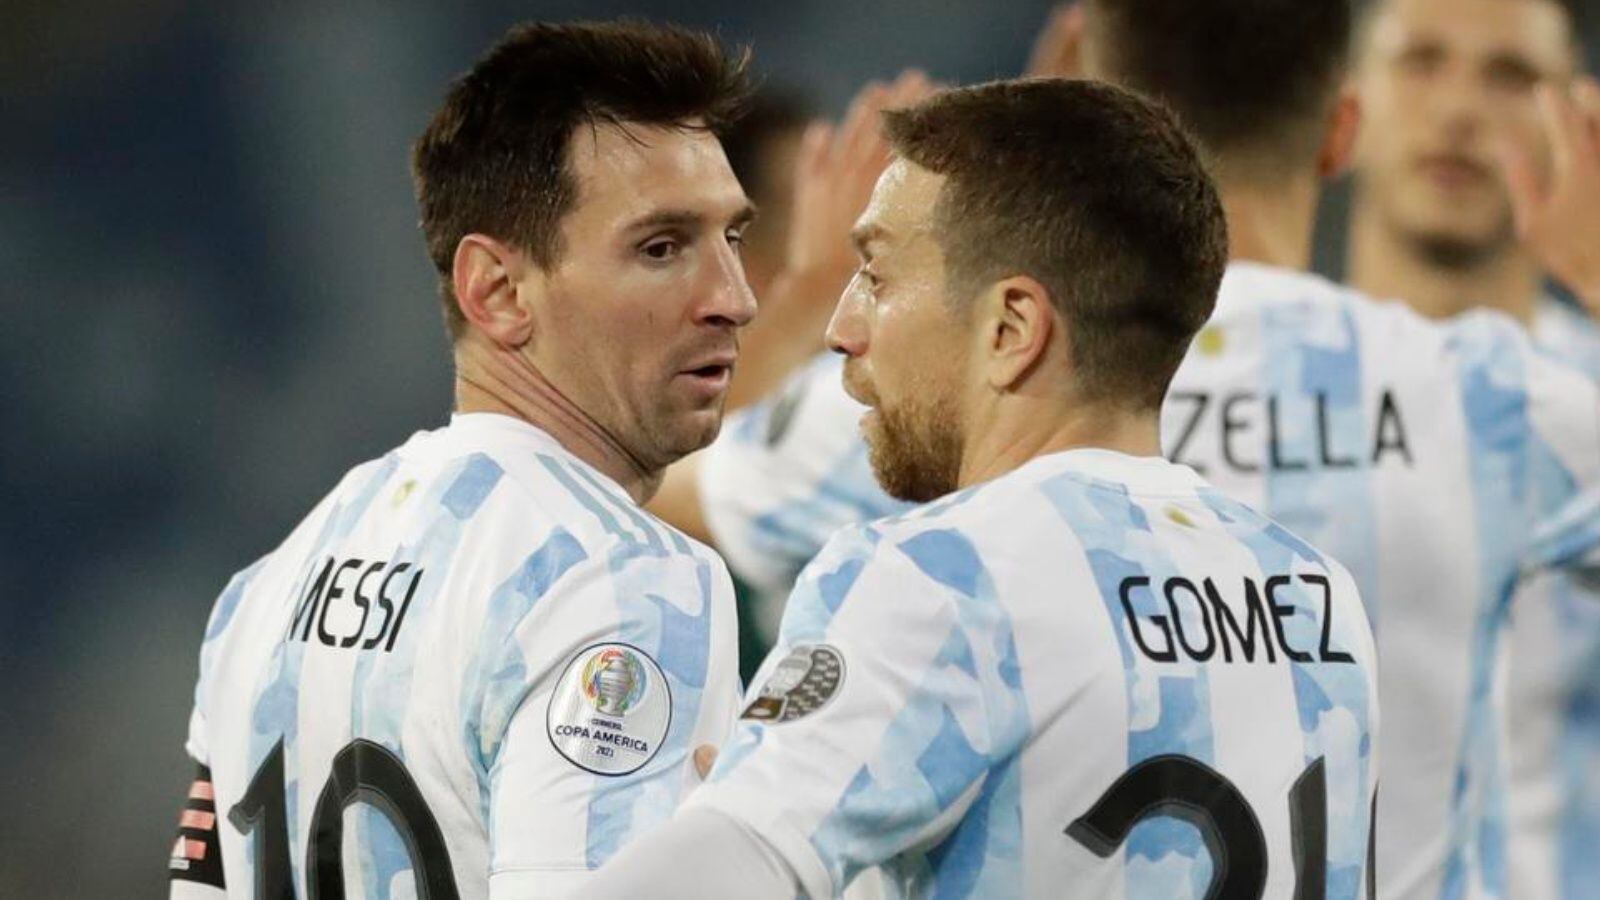 Like Papu Gómez, the figure who will no longer play in Argentina with Messi